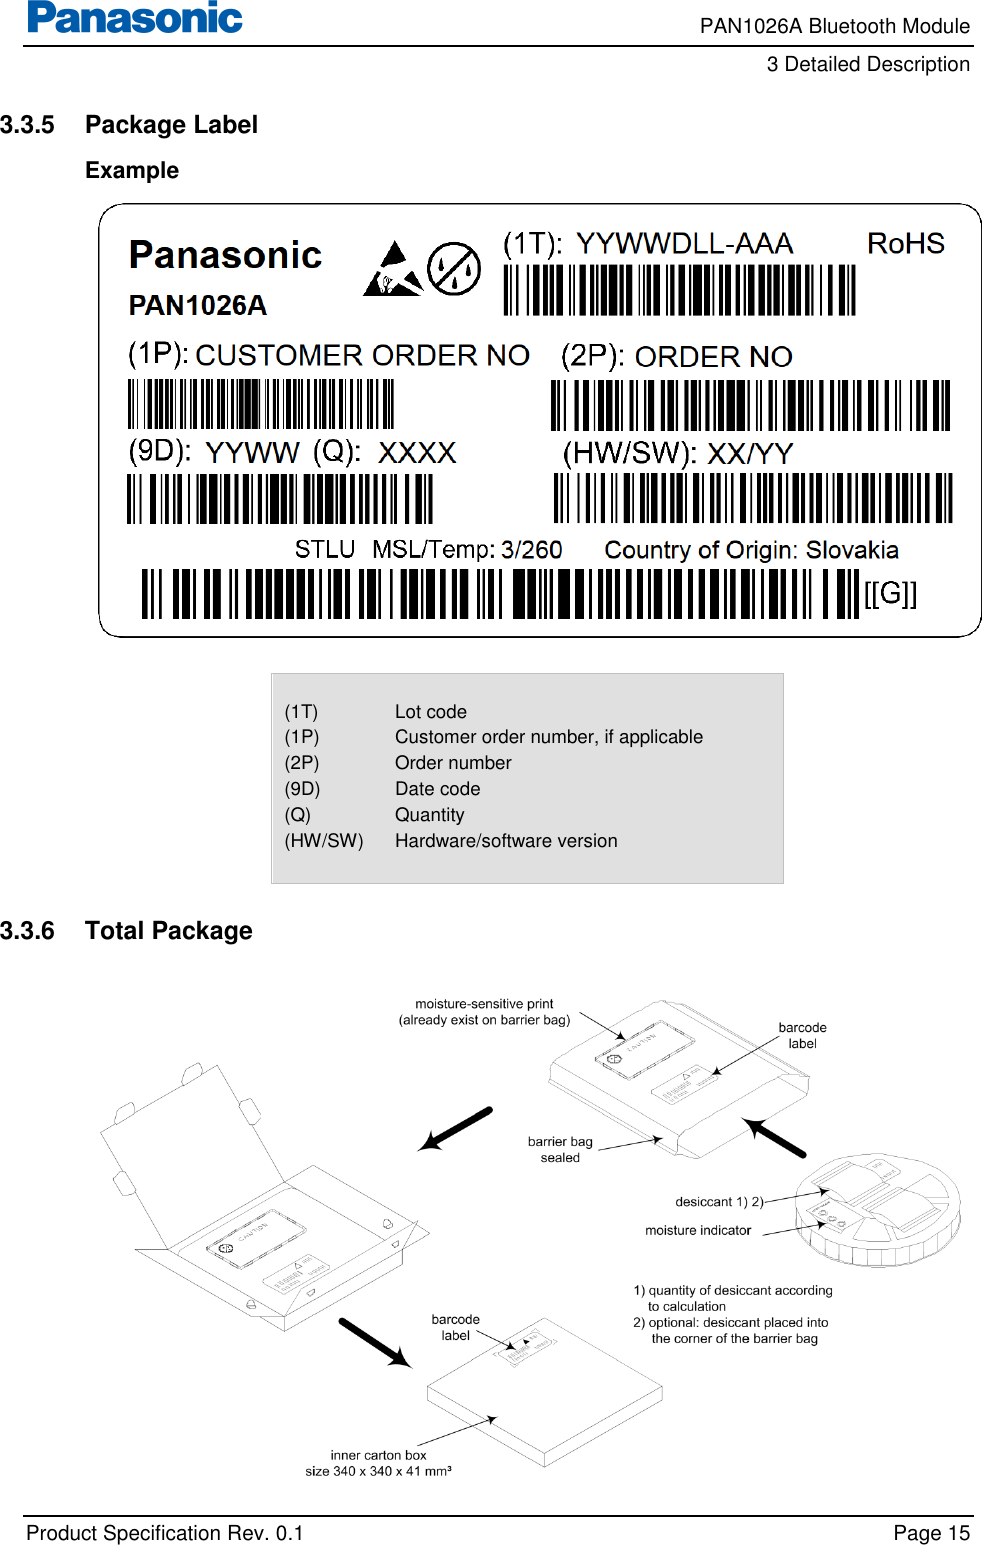     PAN1026A Bluetooth Module         3 Detailed Description    Product Specification Rev. 0.1    Page 15  3.3.5  Package Label Example    (1T) (1P) (2P) (9D) (Q) (HW/SW)  Lot code Customer order number, if applicable Order number Date code Quantity Hardware/software version   3.3.6  Total Package   